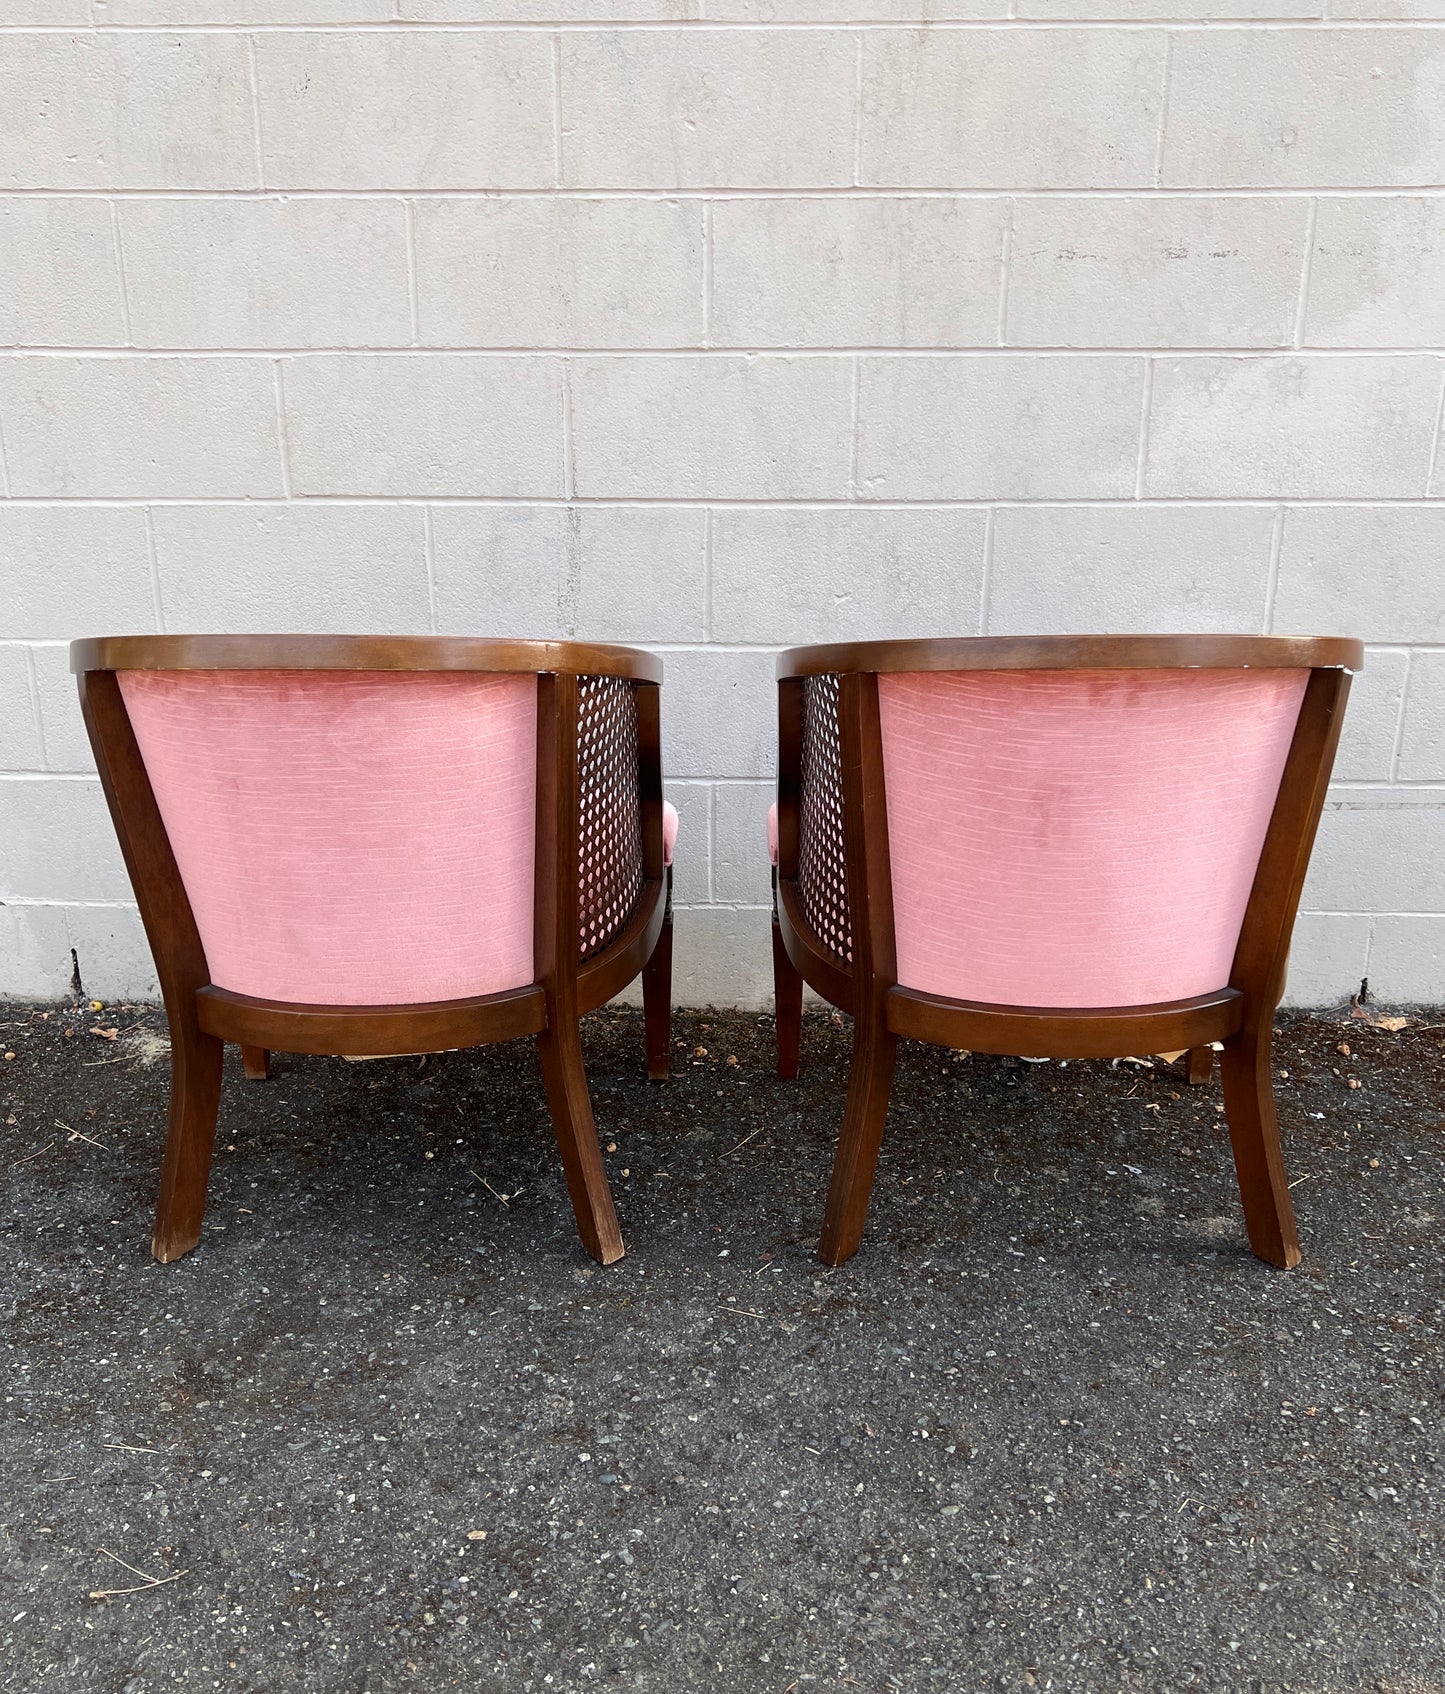 The Dusty Rose Chairs